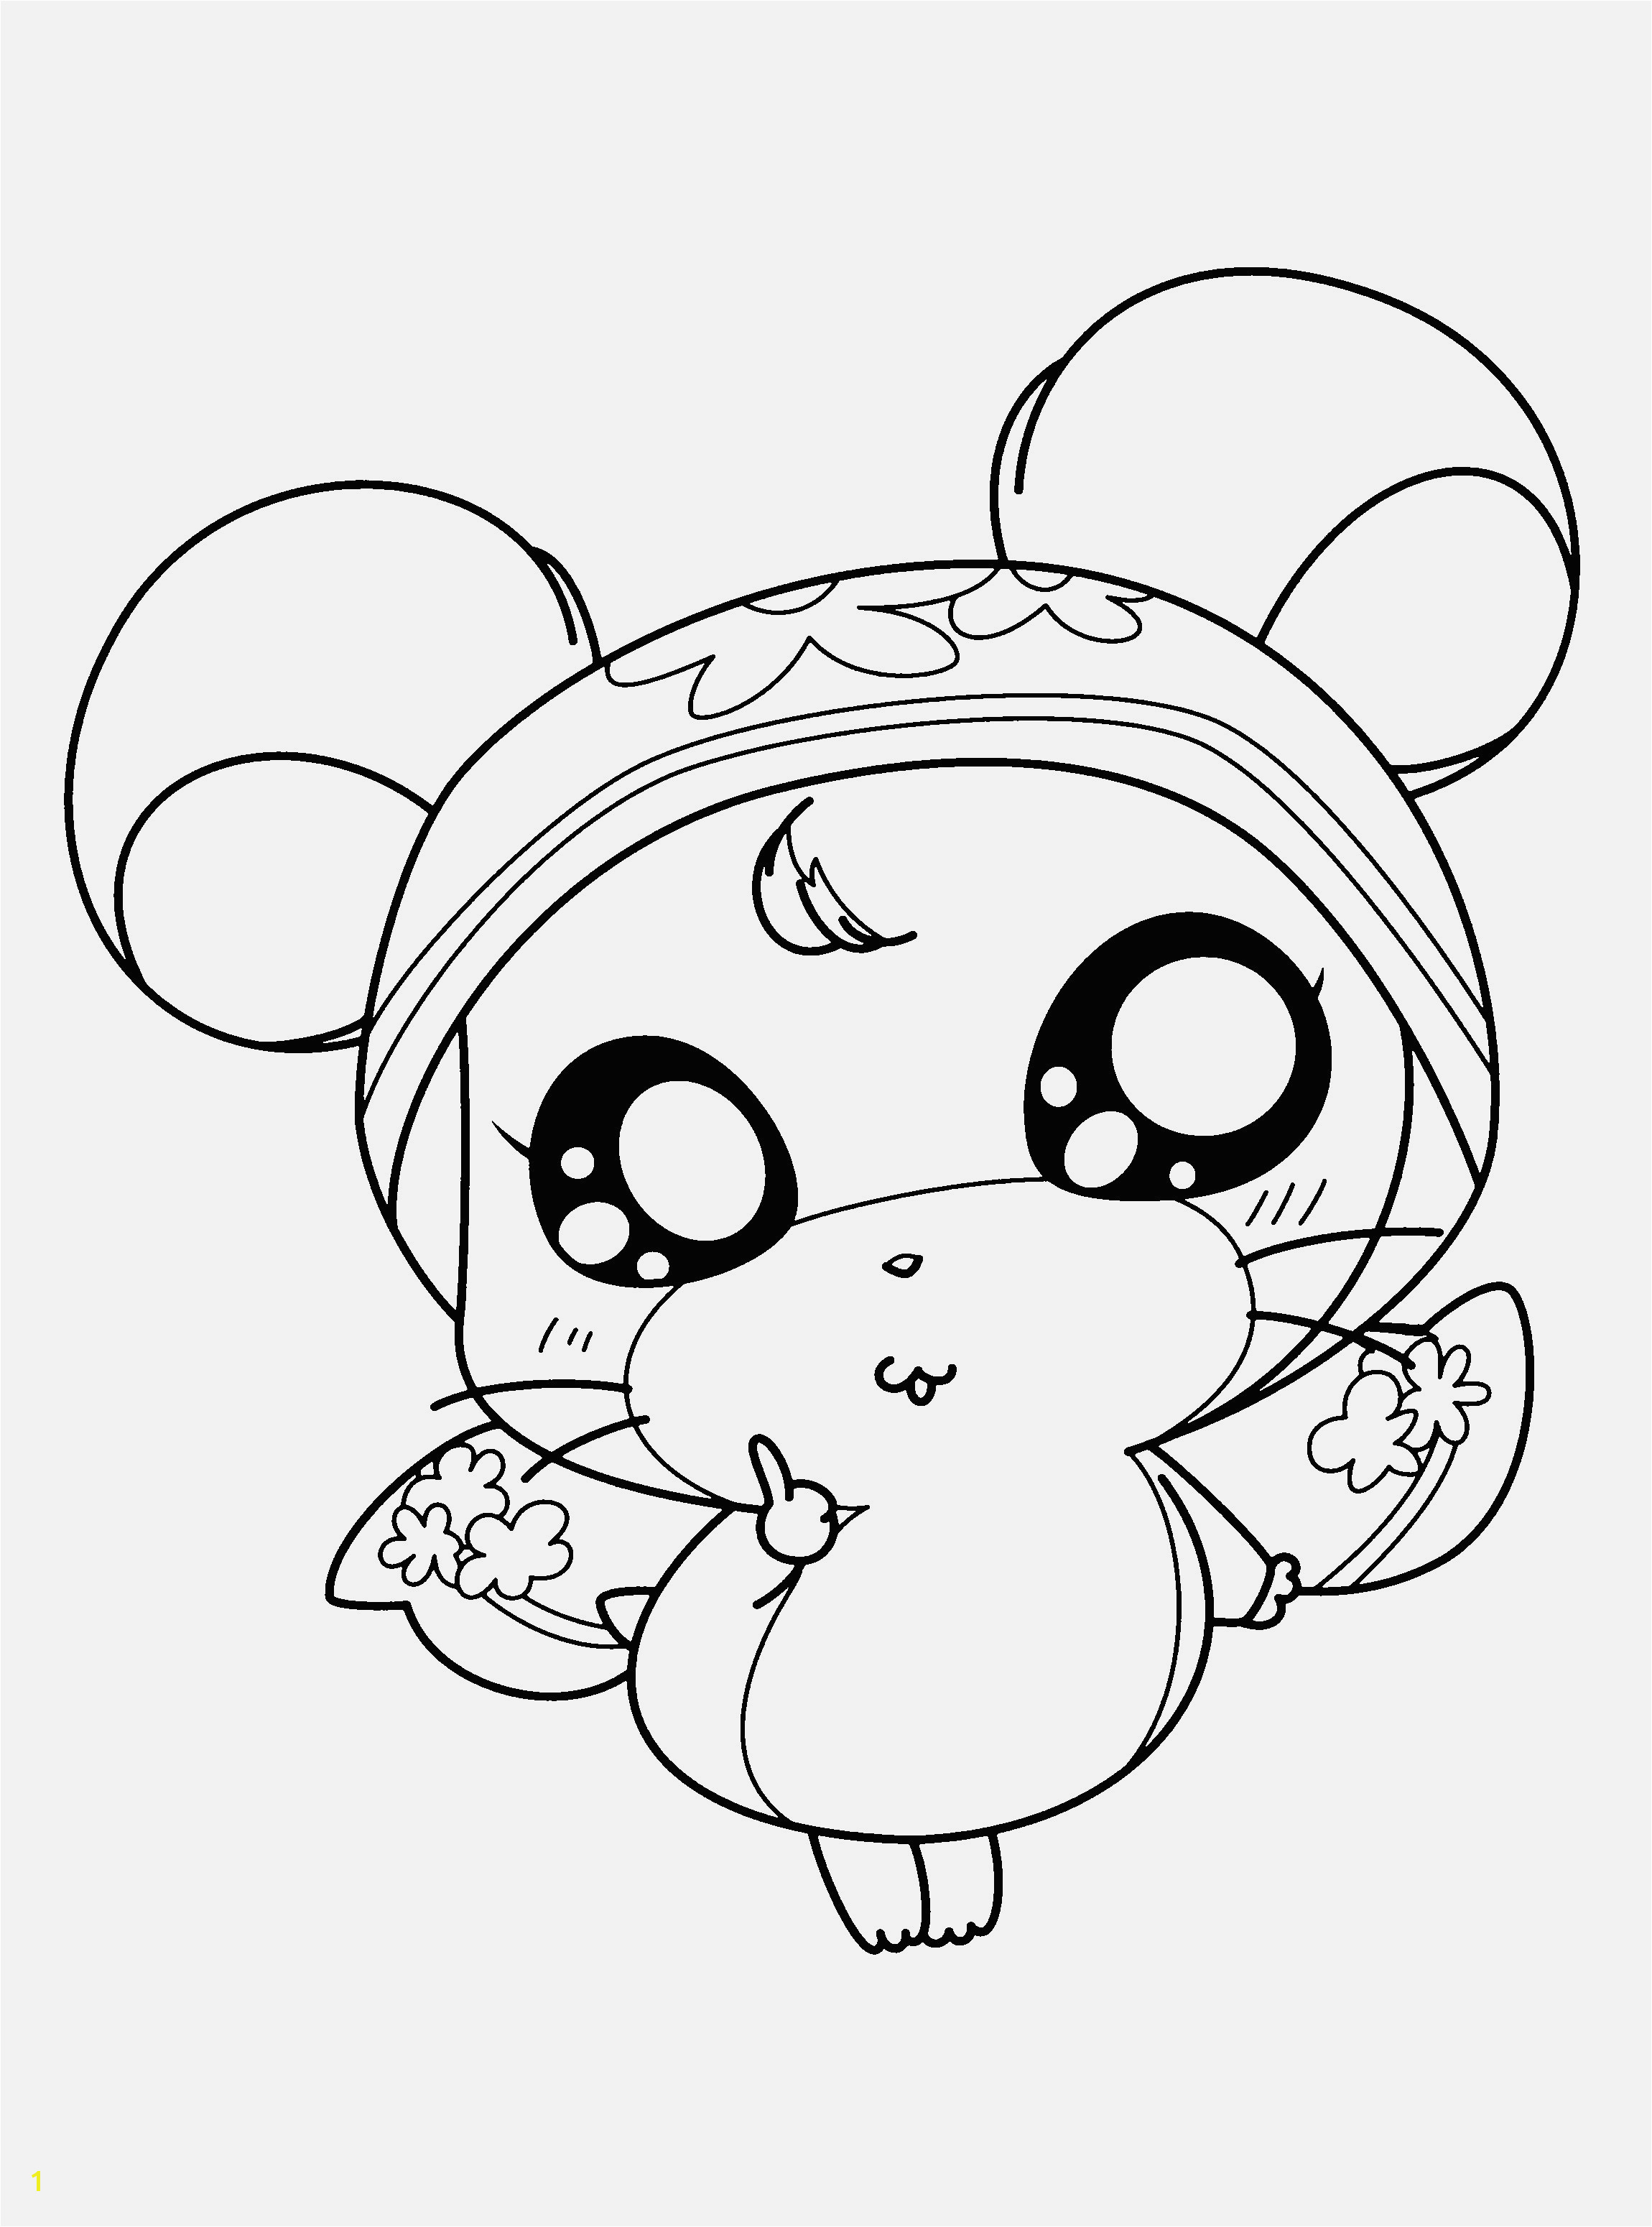 Care Bear Coloring Pages Printable Coloring Pages Bear Coloring Pages Lovely ¢†¡